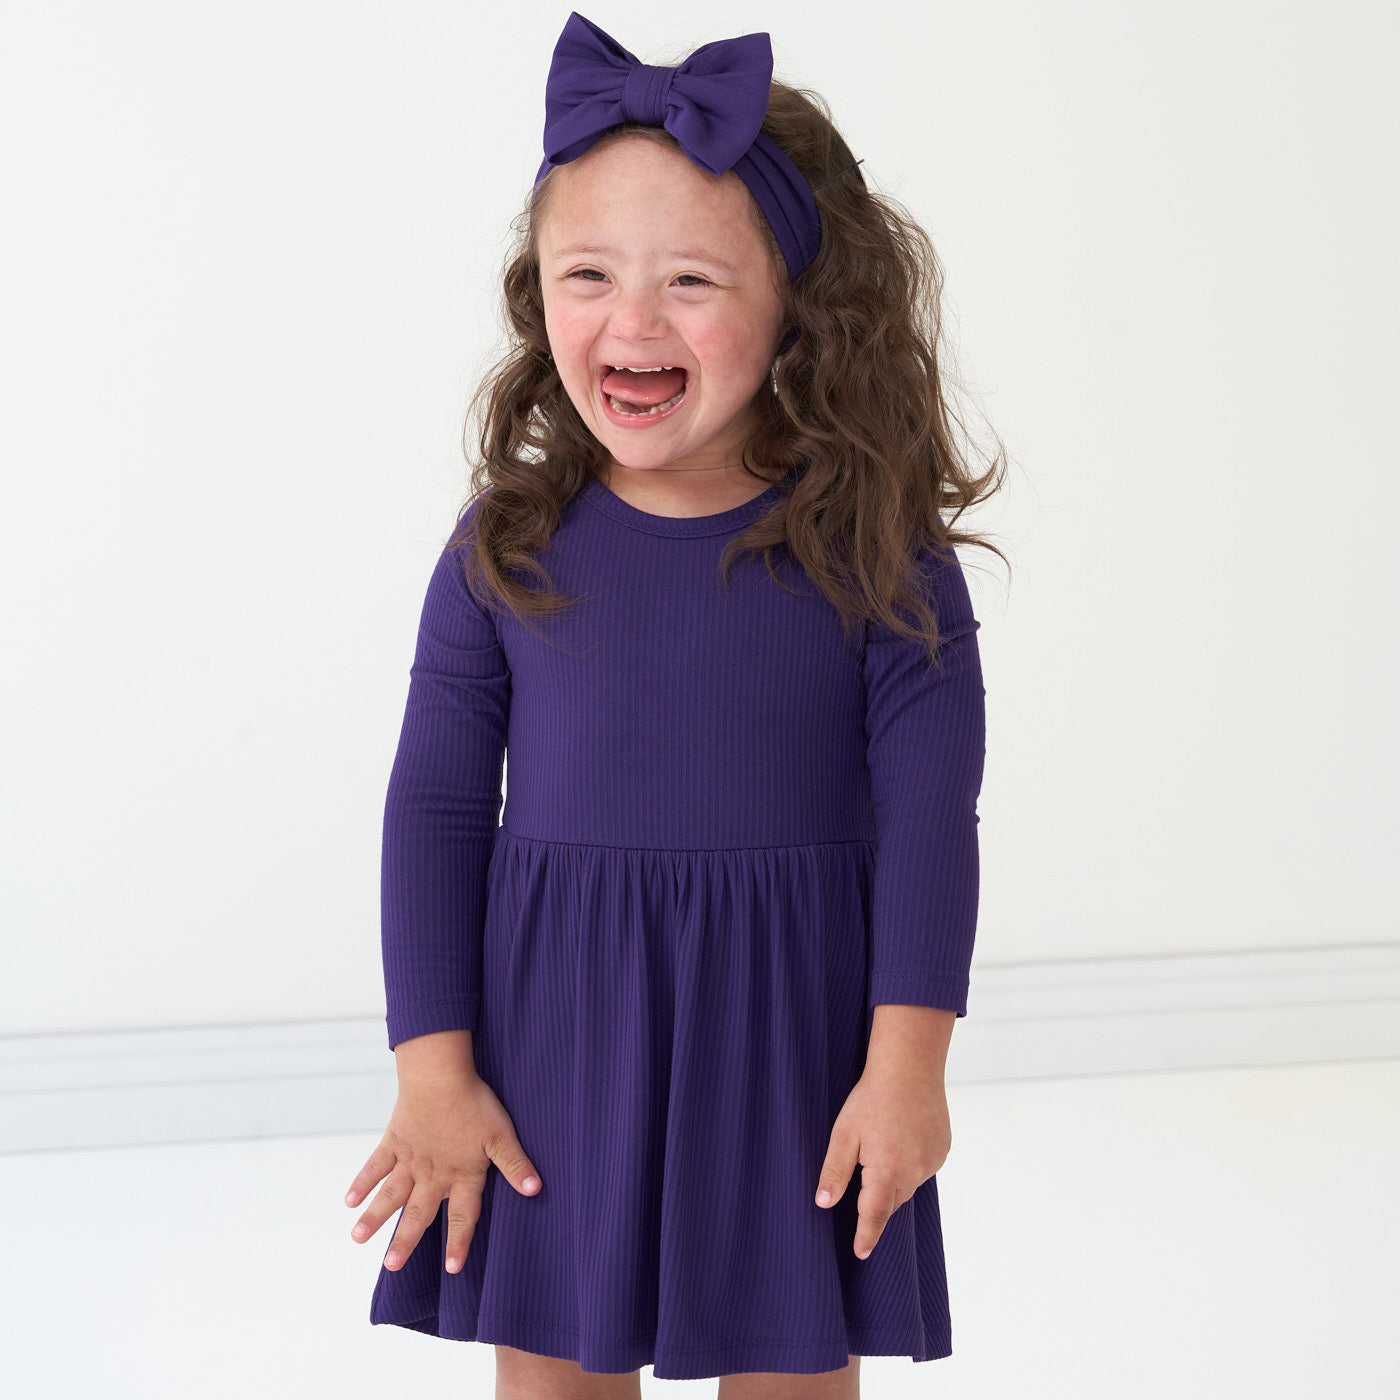 Alternate image of a child wearing a Deep Amethyst ribbed twirl dress and matching luxe bow headband